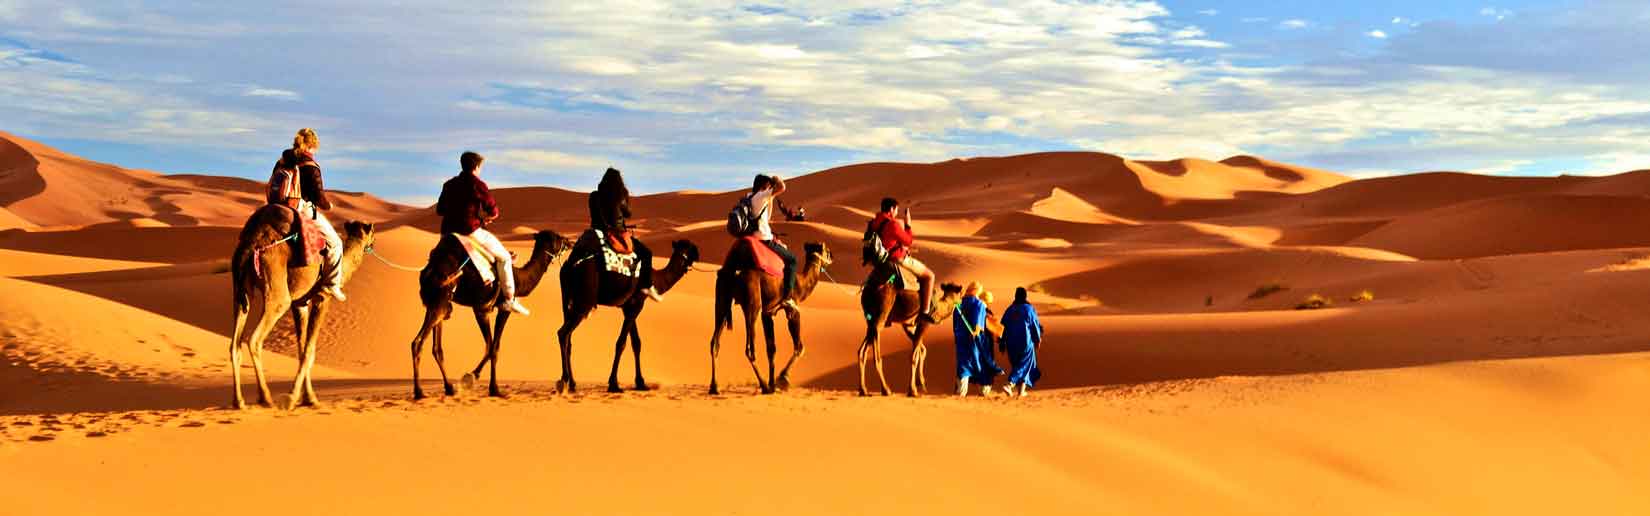 Morocco Desert Tours from Marrakech or from Fes 